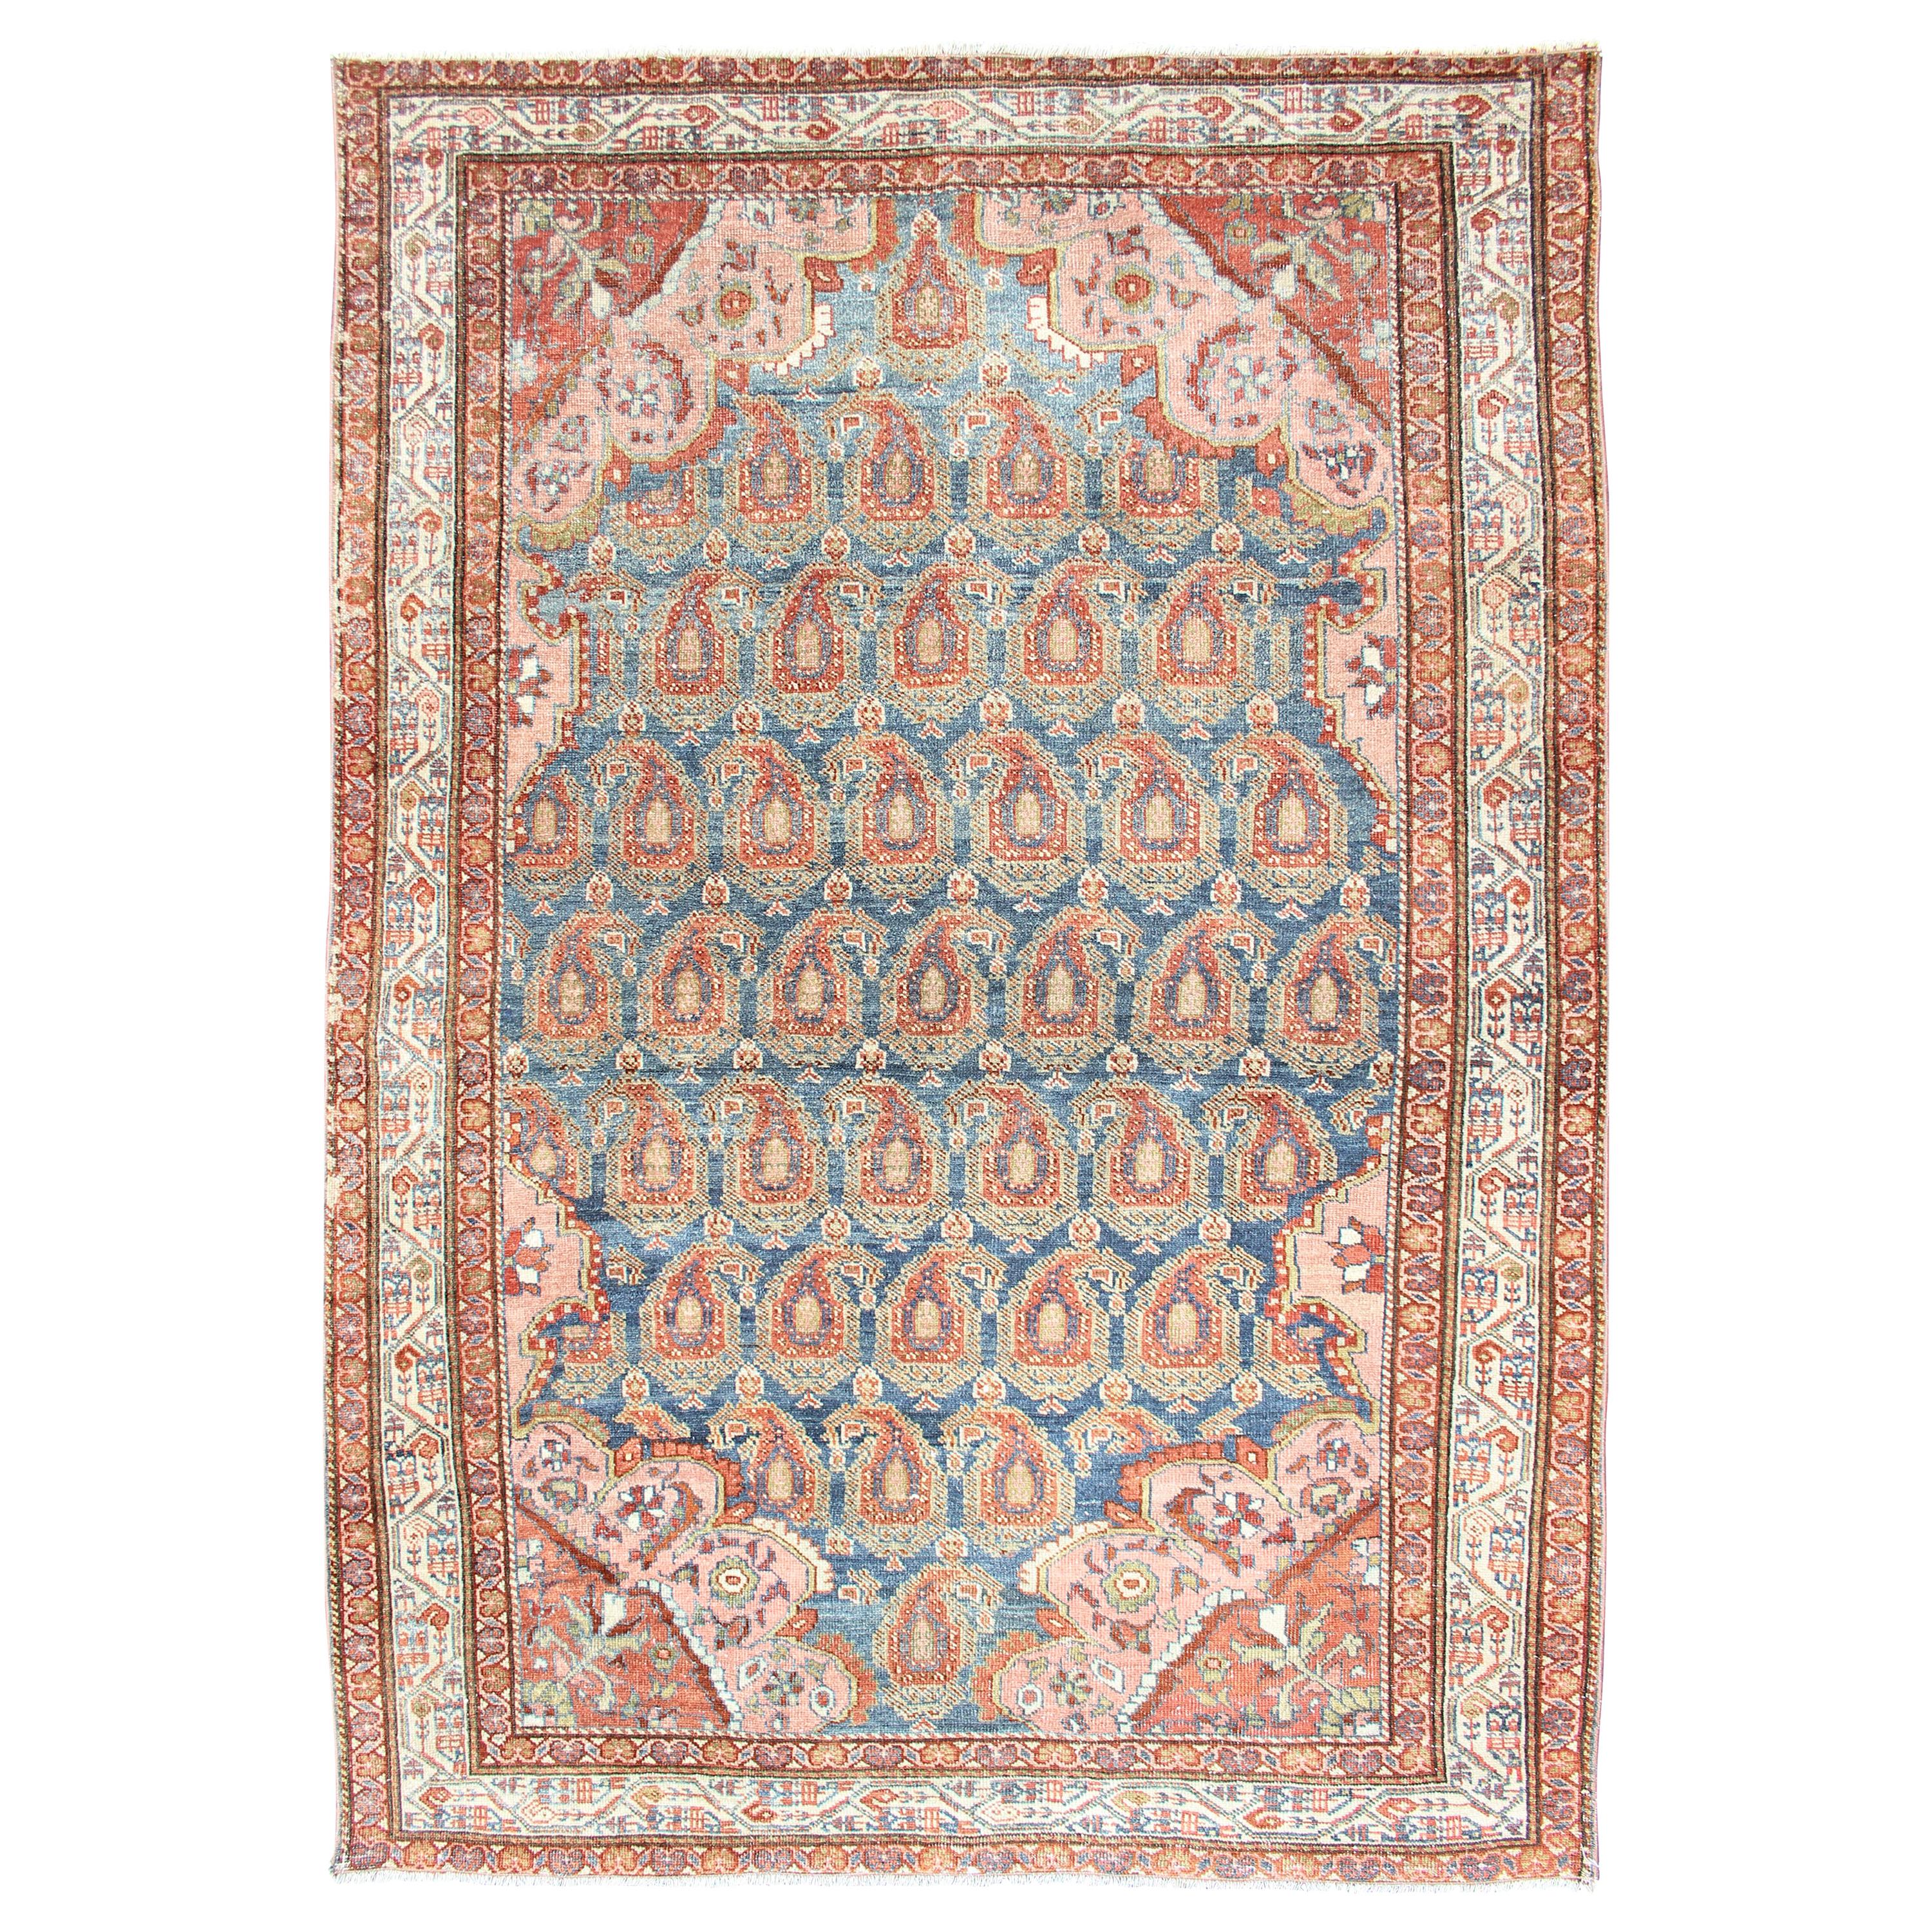 Colorful Antique Persian Hamadan Rug with Large Scale Paisley & Intricate Design For Sale